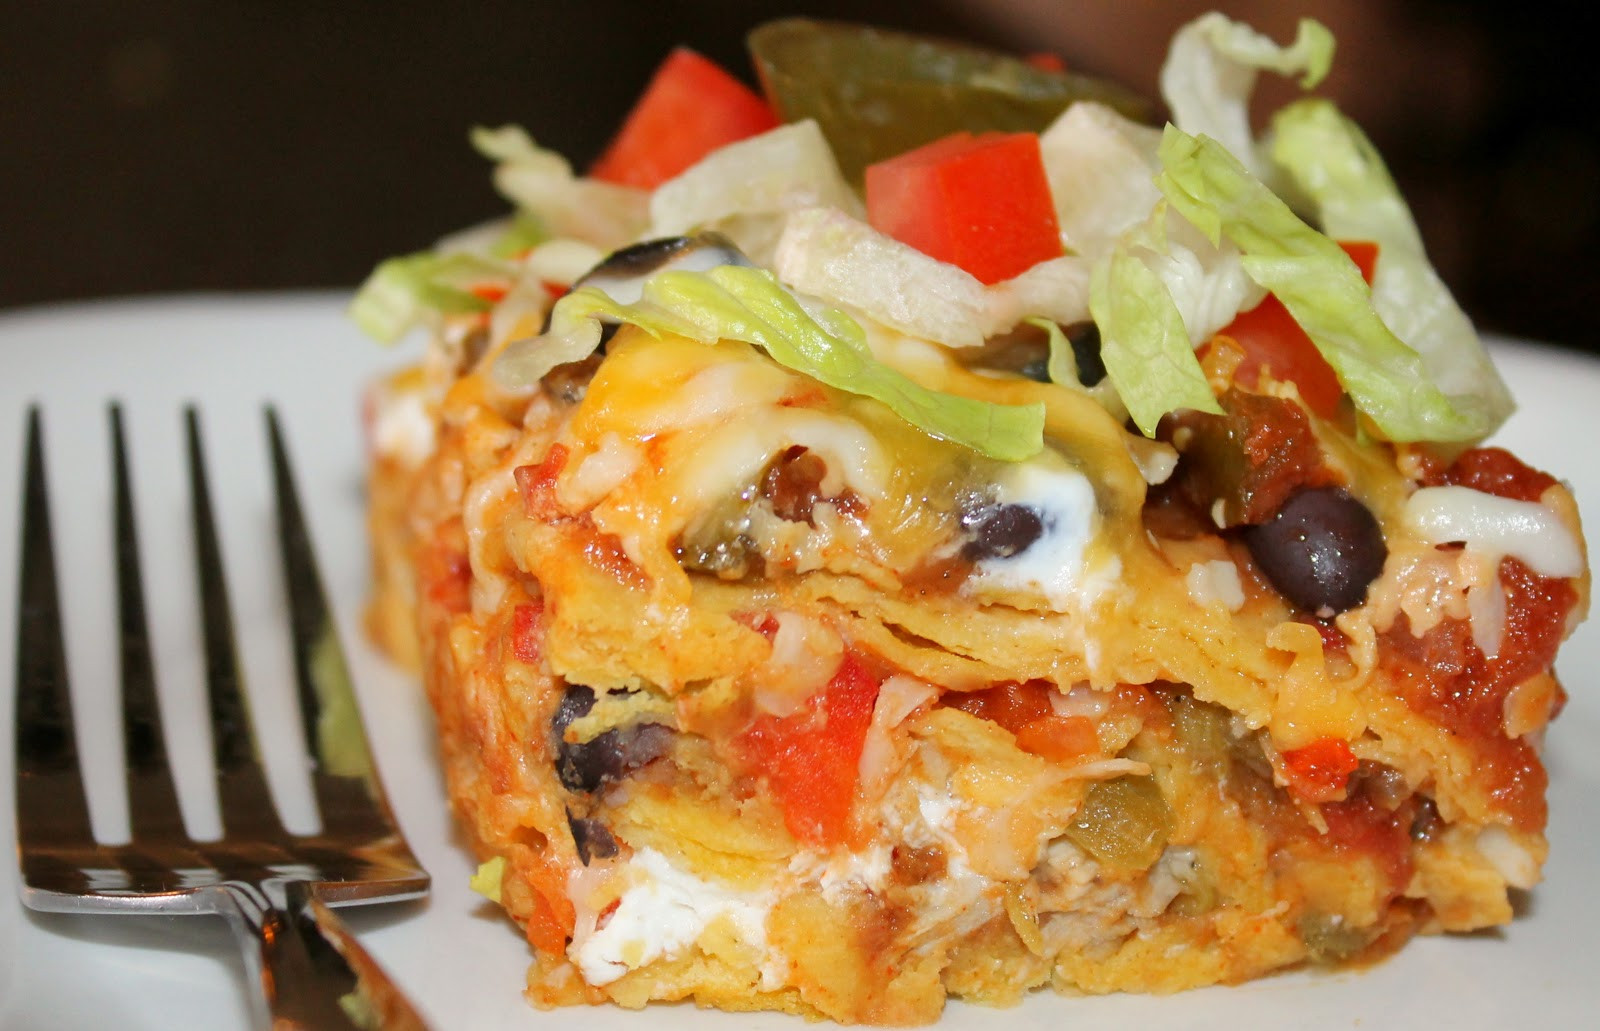 The 25 Best Ideas for Mexican Lasagna with Flour tortillas - Home ...